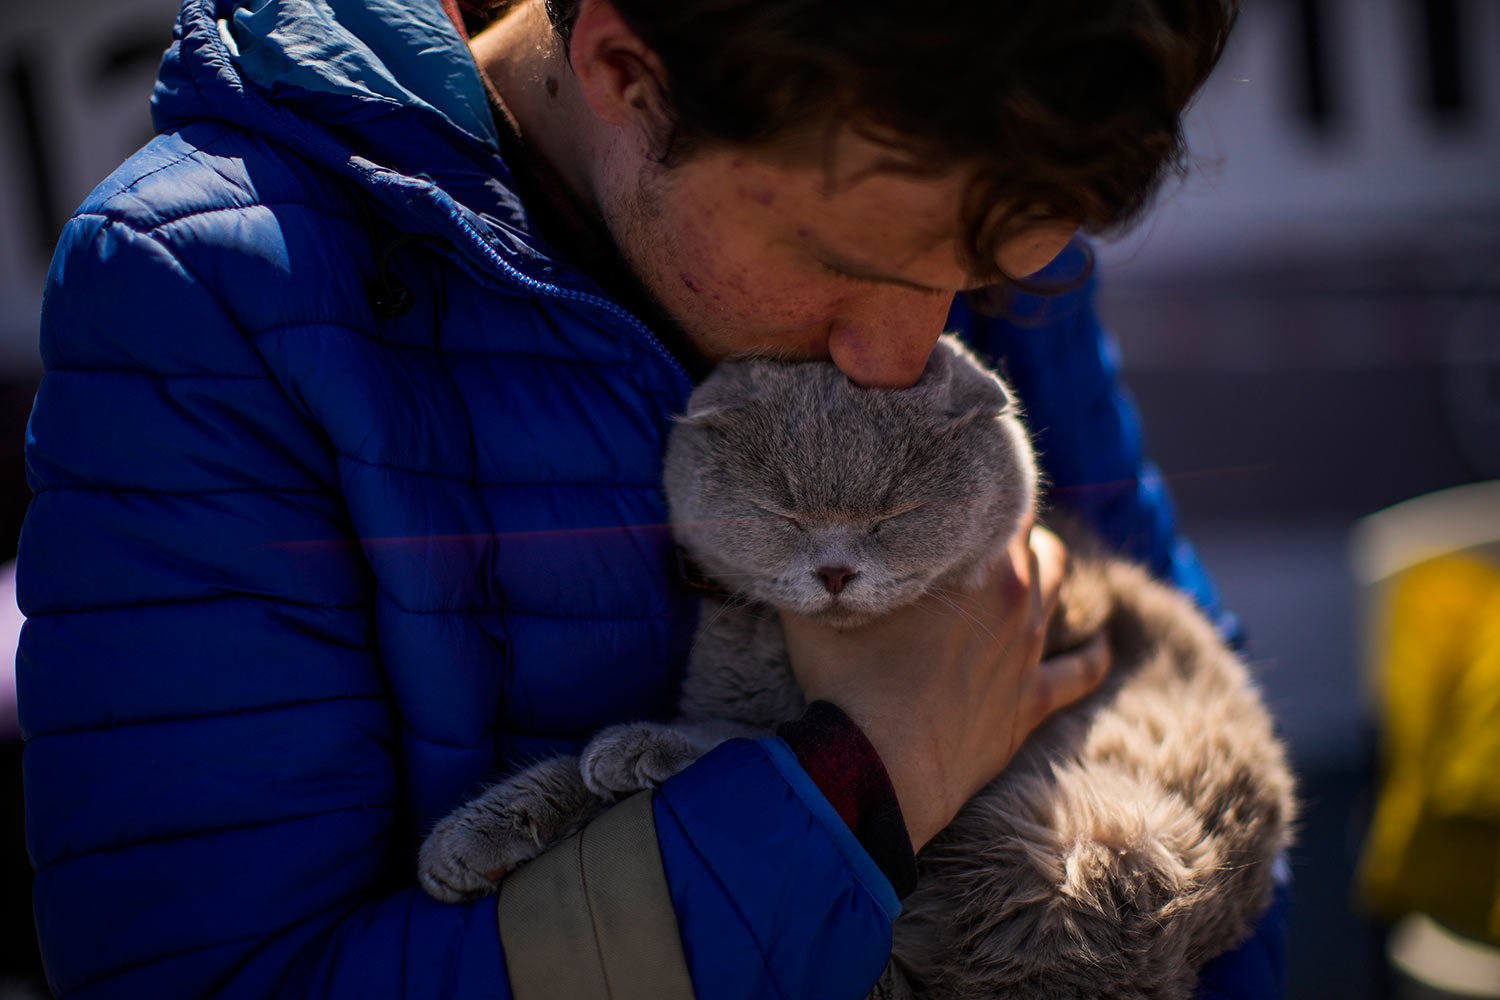  Ivan Andreiev who fled from Mariupol with his family kisses his cat Leonardo upon his arrival to a reception center for displaced people in Zaporizhzhia, Ukraine, Sunday, May 8, 2022. (AP Photo/Francisco Seco) 